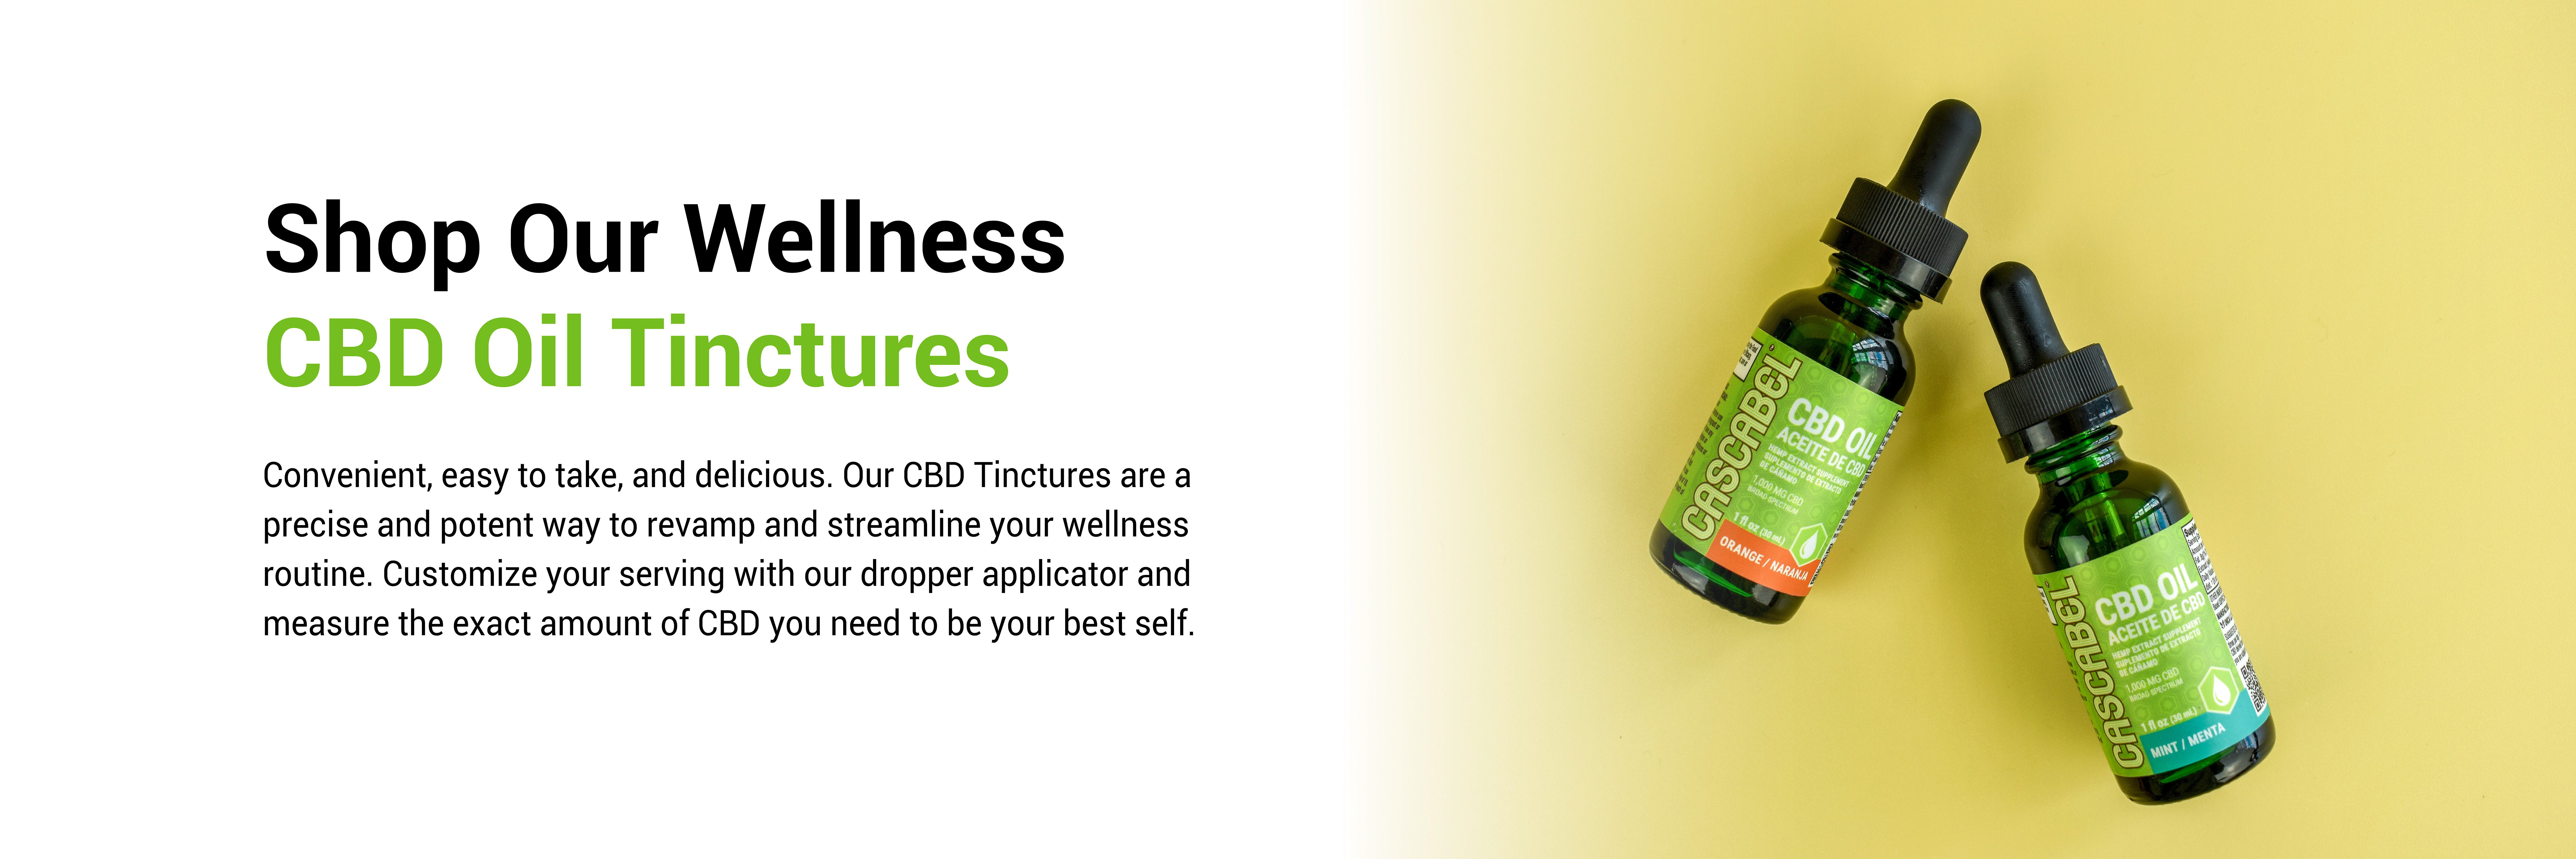 Shop Our Wellness CBD Oil Tinctures Products